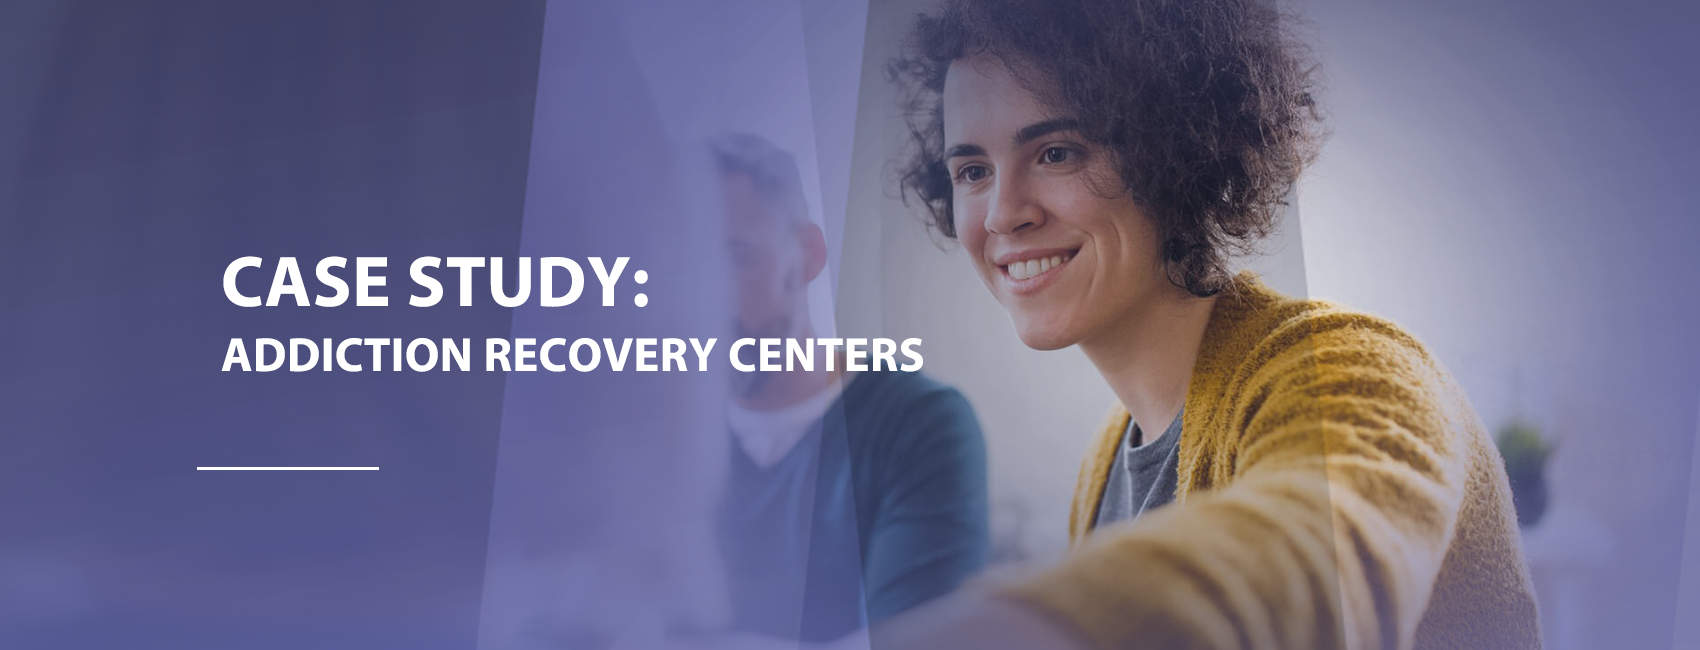 addiction-recovery-centers